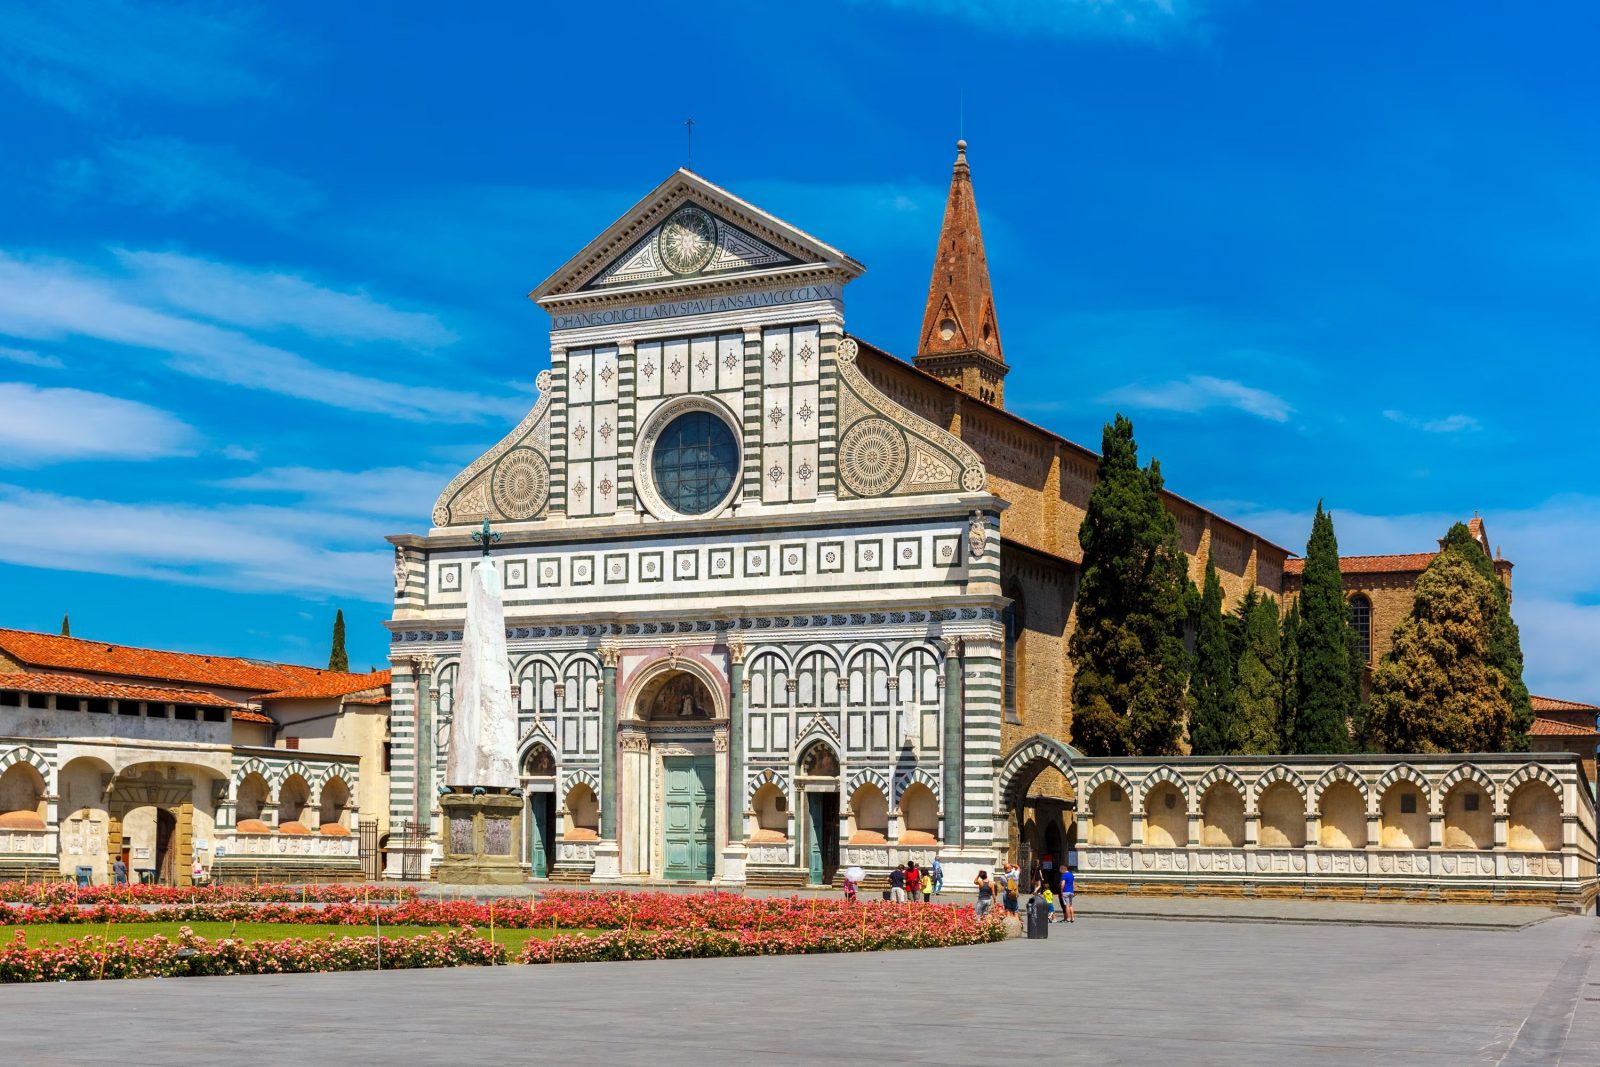 Take Trip Around Italy in This Quiz — If You Get 18, You Win Santa Maria Novella church, Florence, Italy